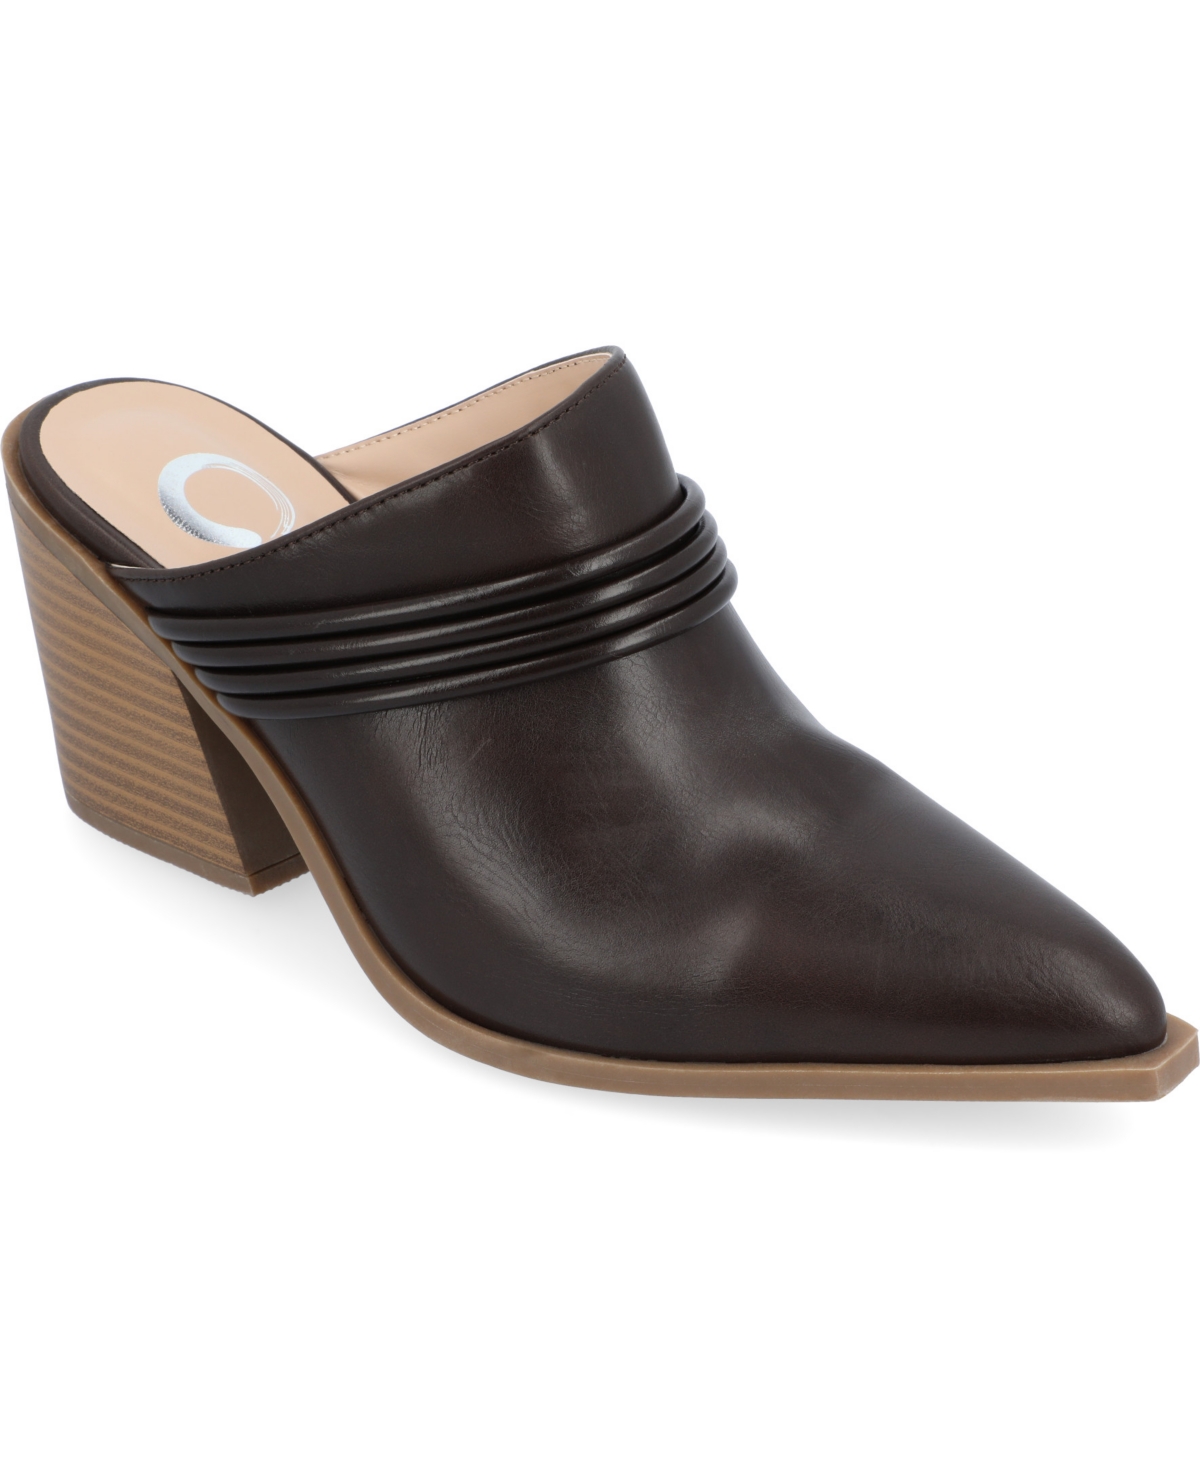 Women's Jinny Banded Mules - Taupe